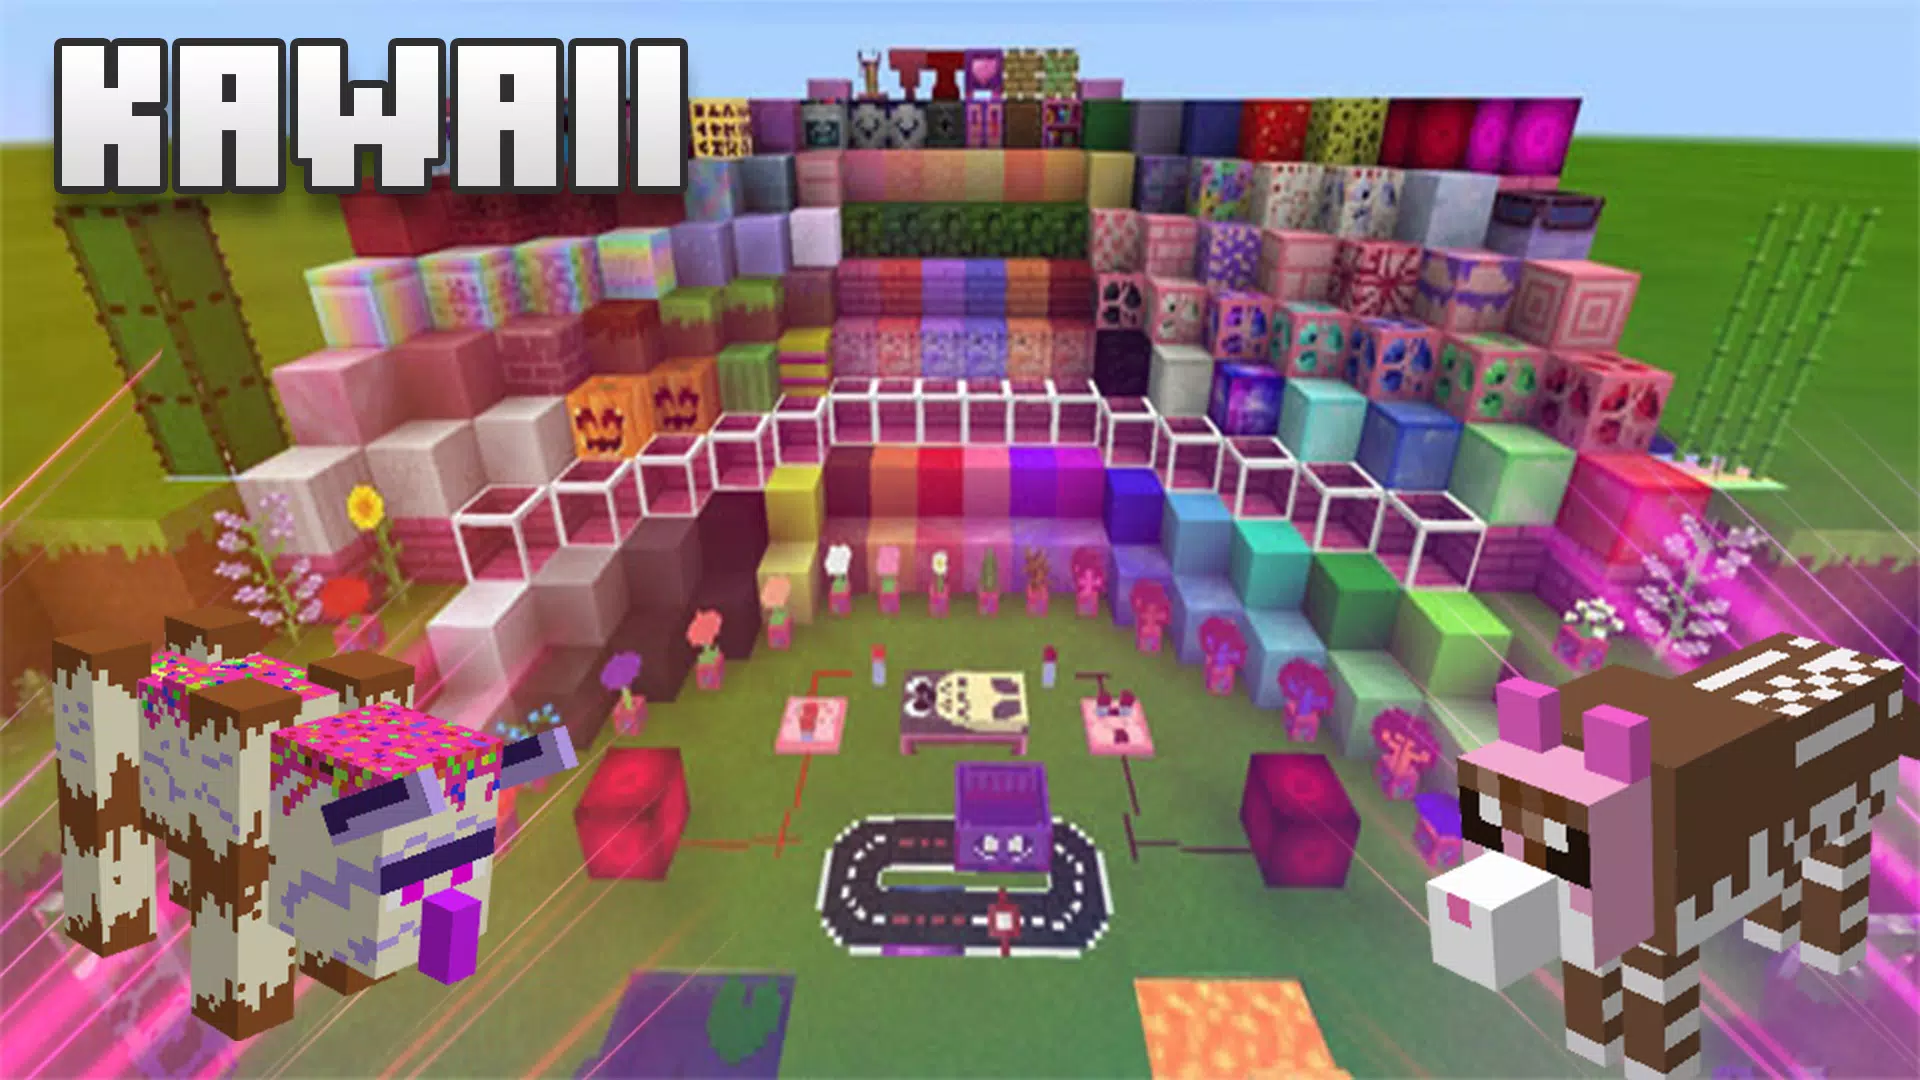 Kawaii World Minecraft for Android - Download